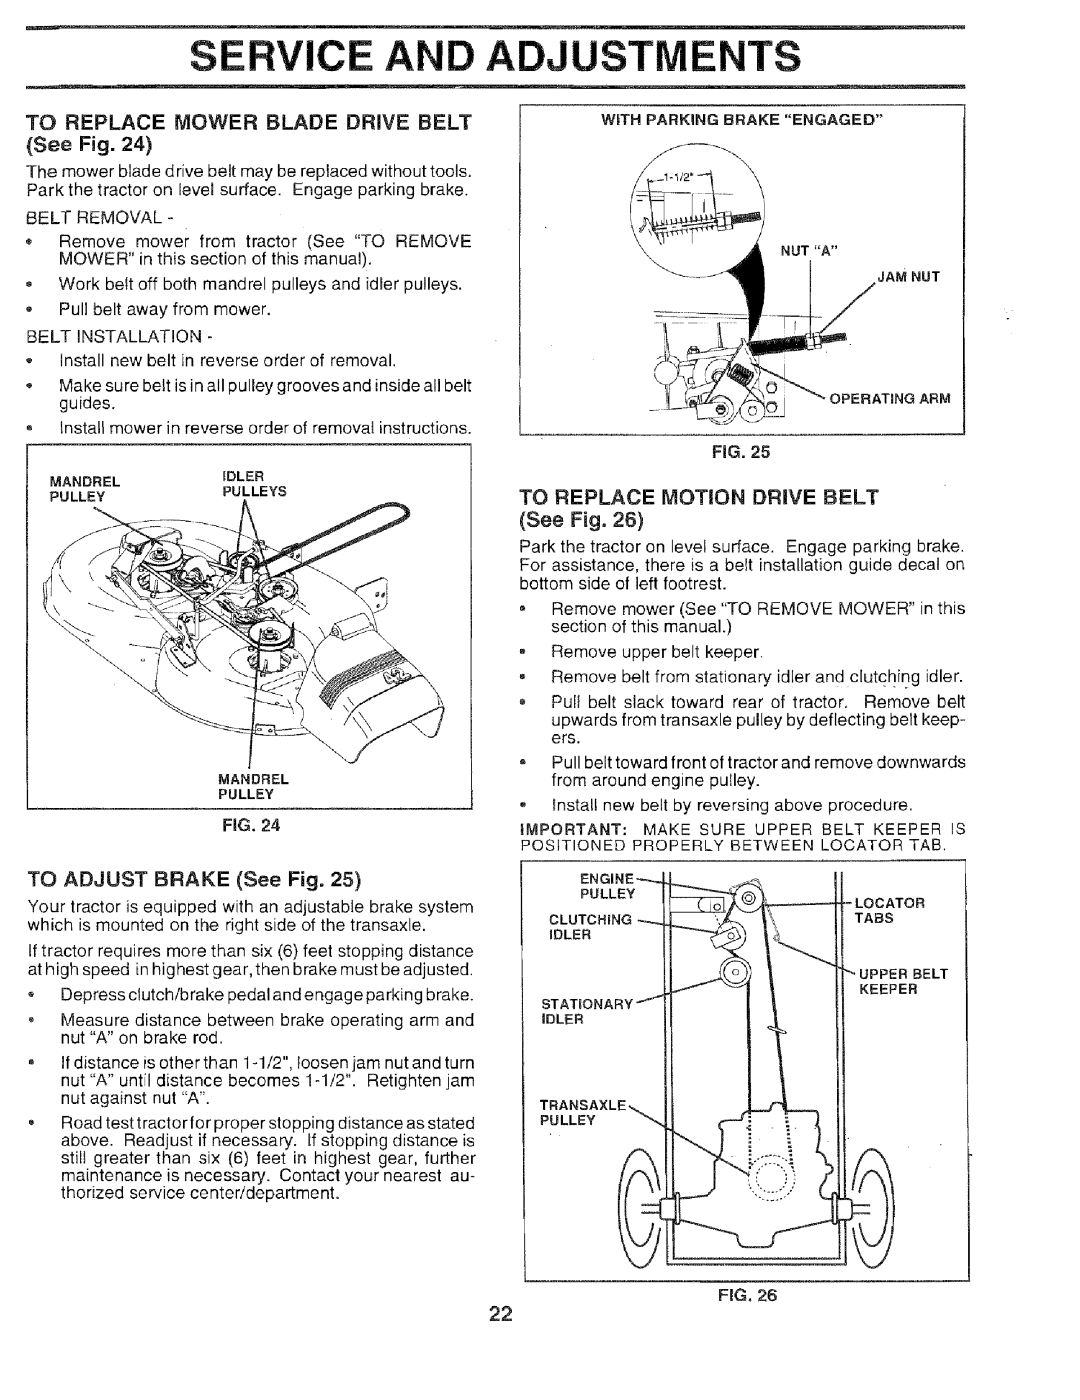 Sears 917.259567 owner manual Ervice And Adjustments, Replace Mower, Blade, Drive Belt, TO ADJUST BRAKE See Fig 